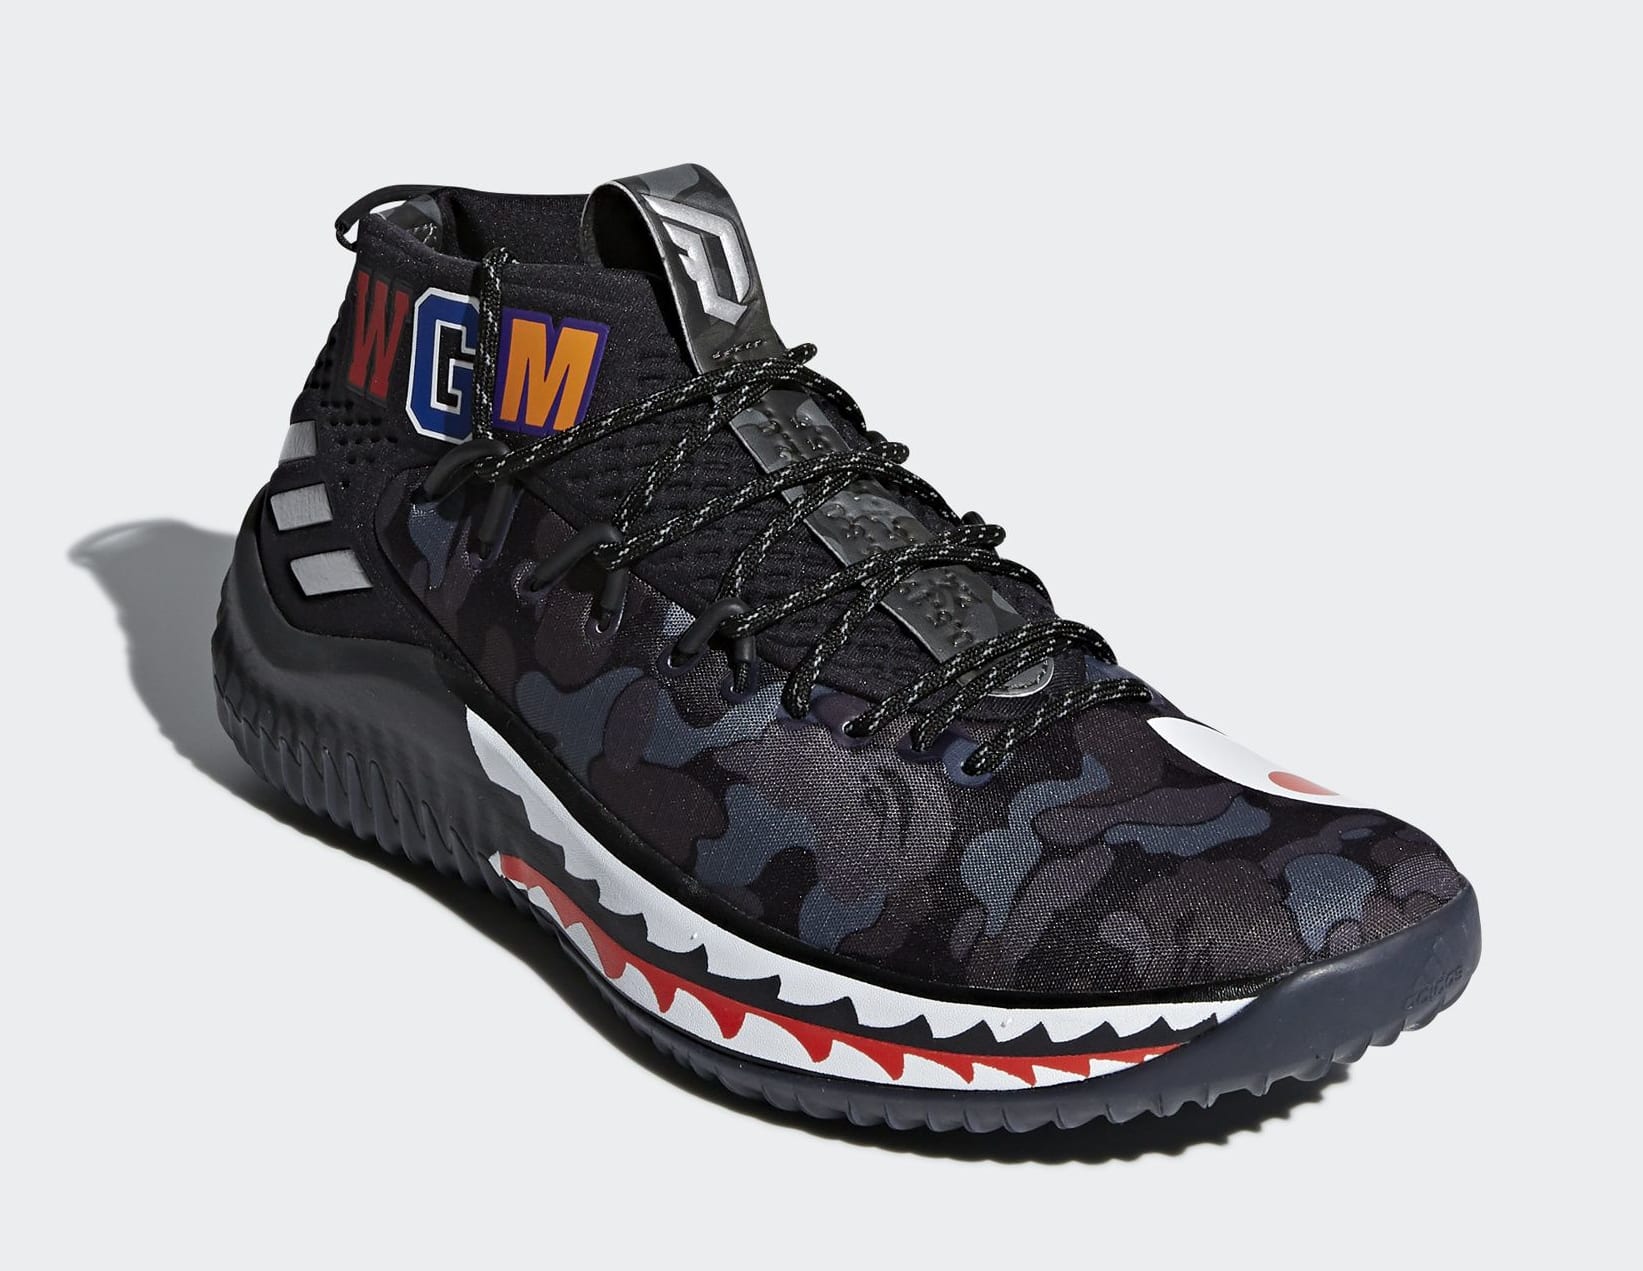 The Bape x Adidas Dame 4 Collaboration Has a Release Date | Complex